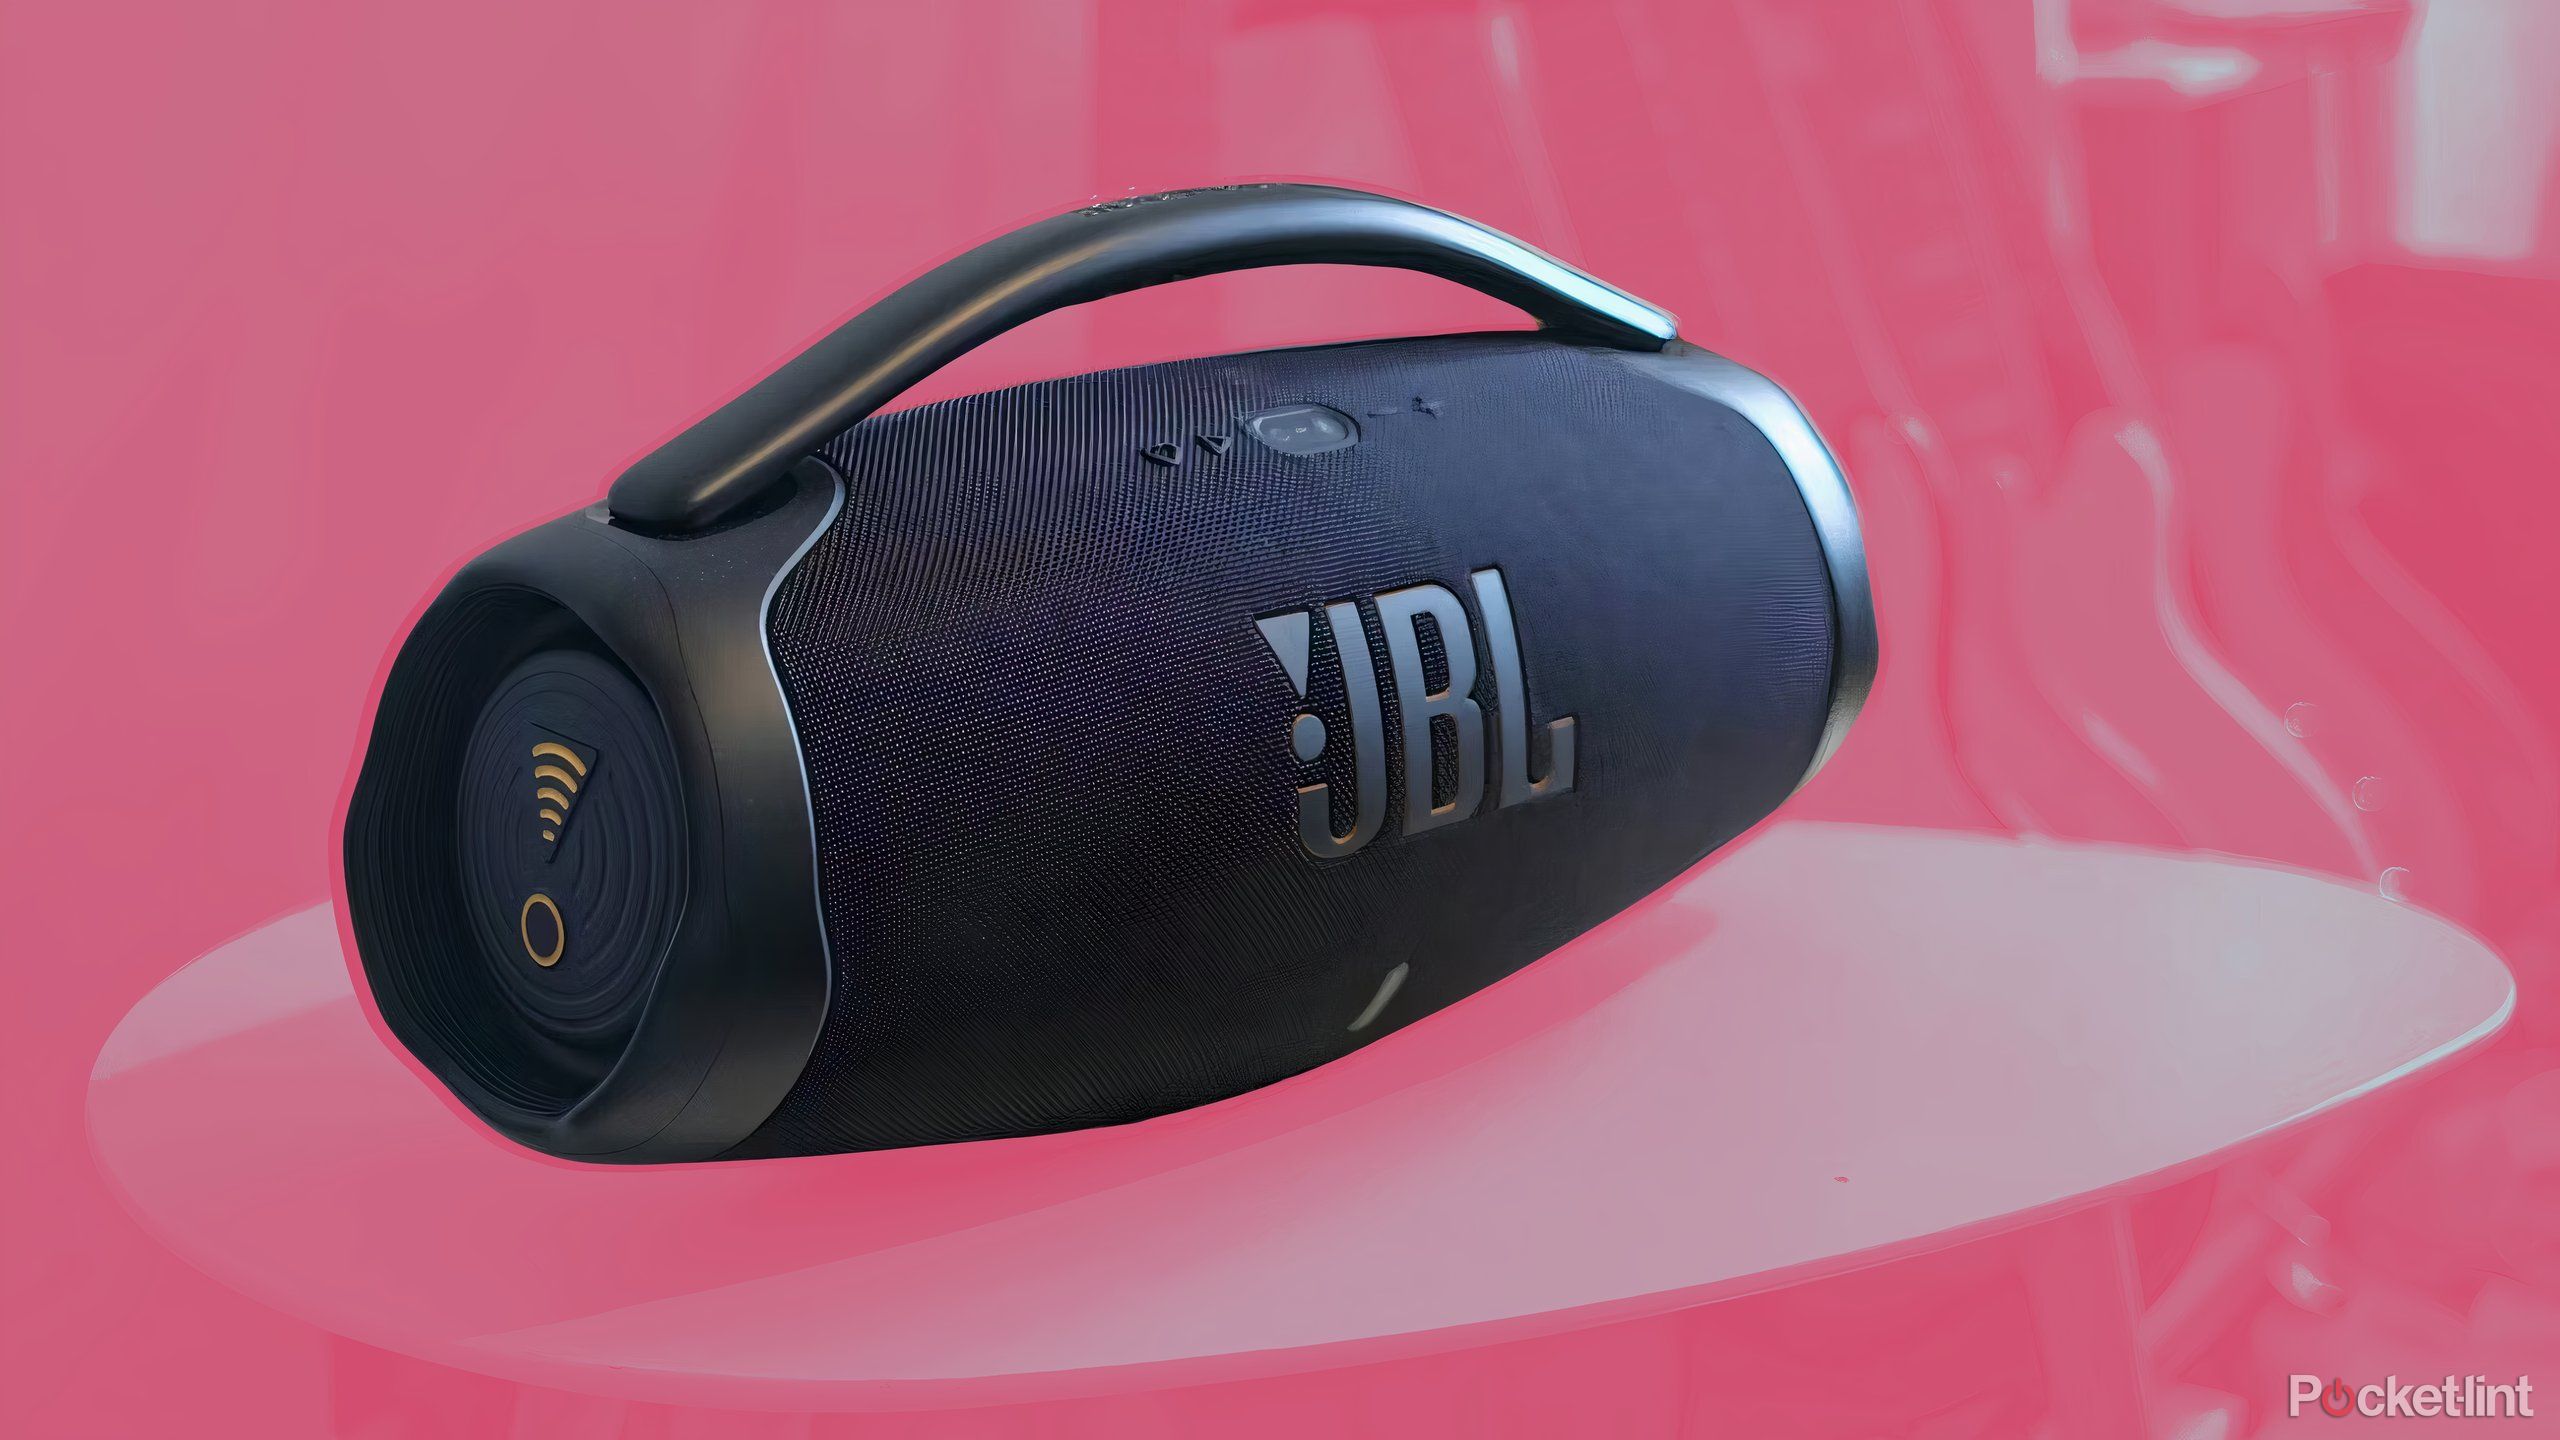 The JBL Boombox 3 Wi-Fi on a colorful, pink background.